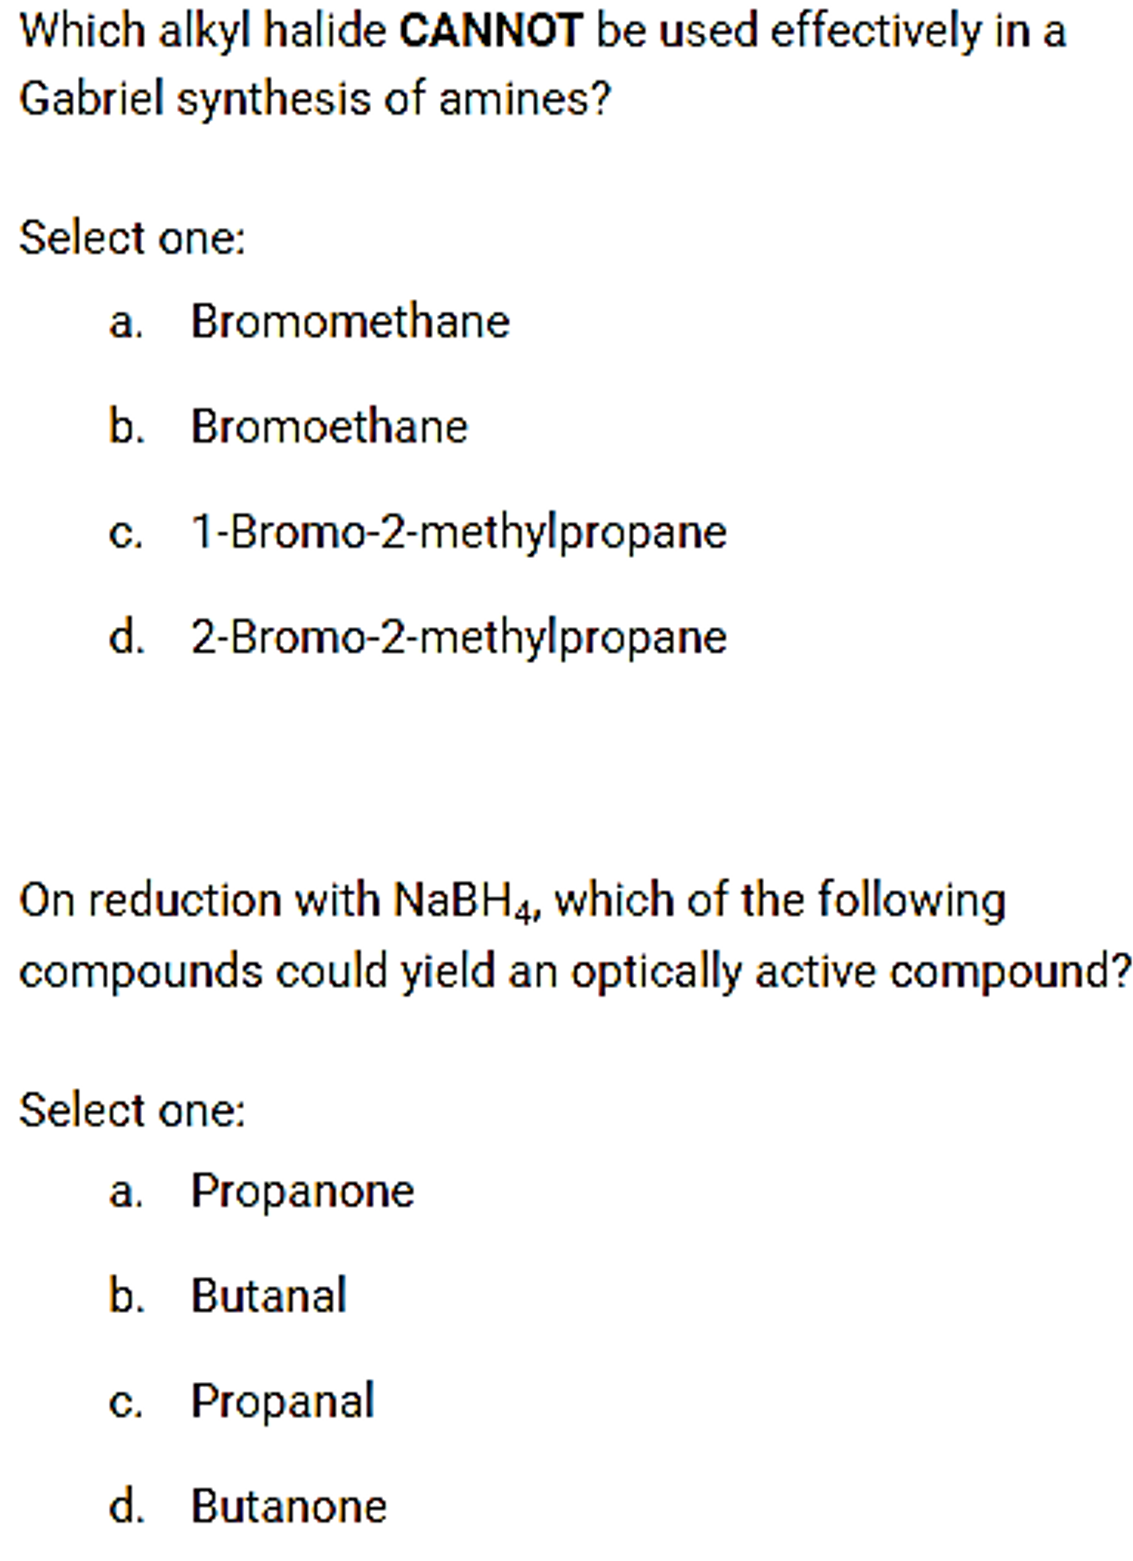 Which alkyl halide CANNOT be used effectively in a
Gabriel synthesis of amines?
Select one:
a. Bromomethane
b. Bromoethane
c. 1-Bromo-2-methylpropane
d. 2-Bromo-2-methylpropane
On reduction with NaBH4, which of the following
compounds could yield an optically active compound?
Select one:
a. Propanone
b. Butanal
c. Propanal
d. Butanone